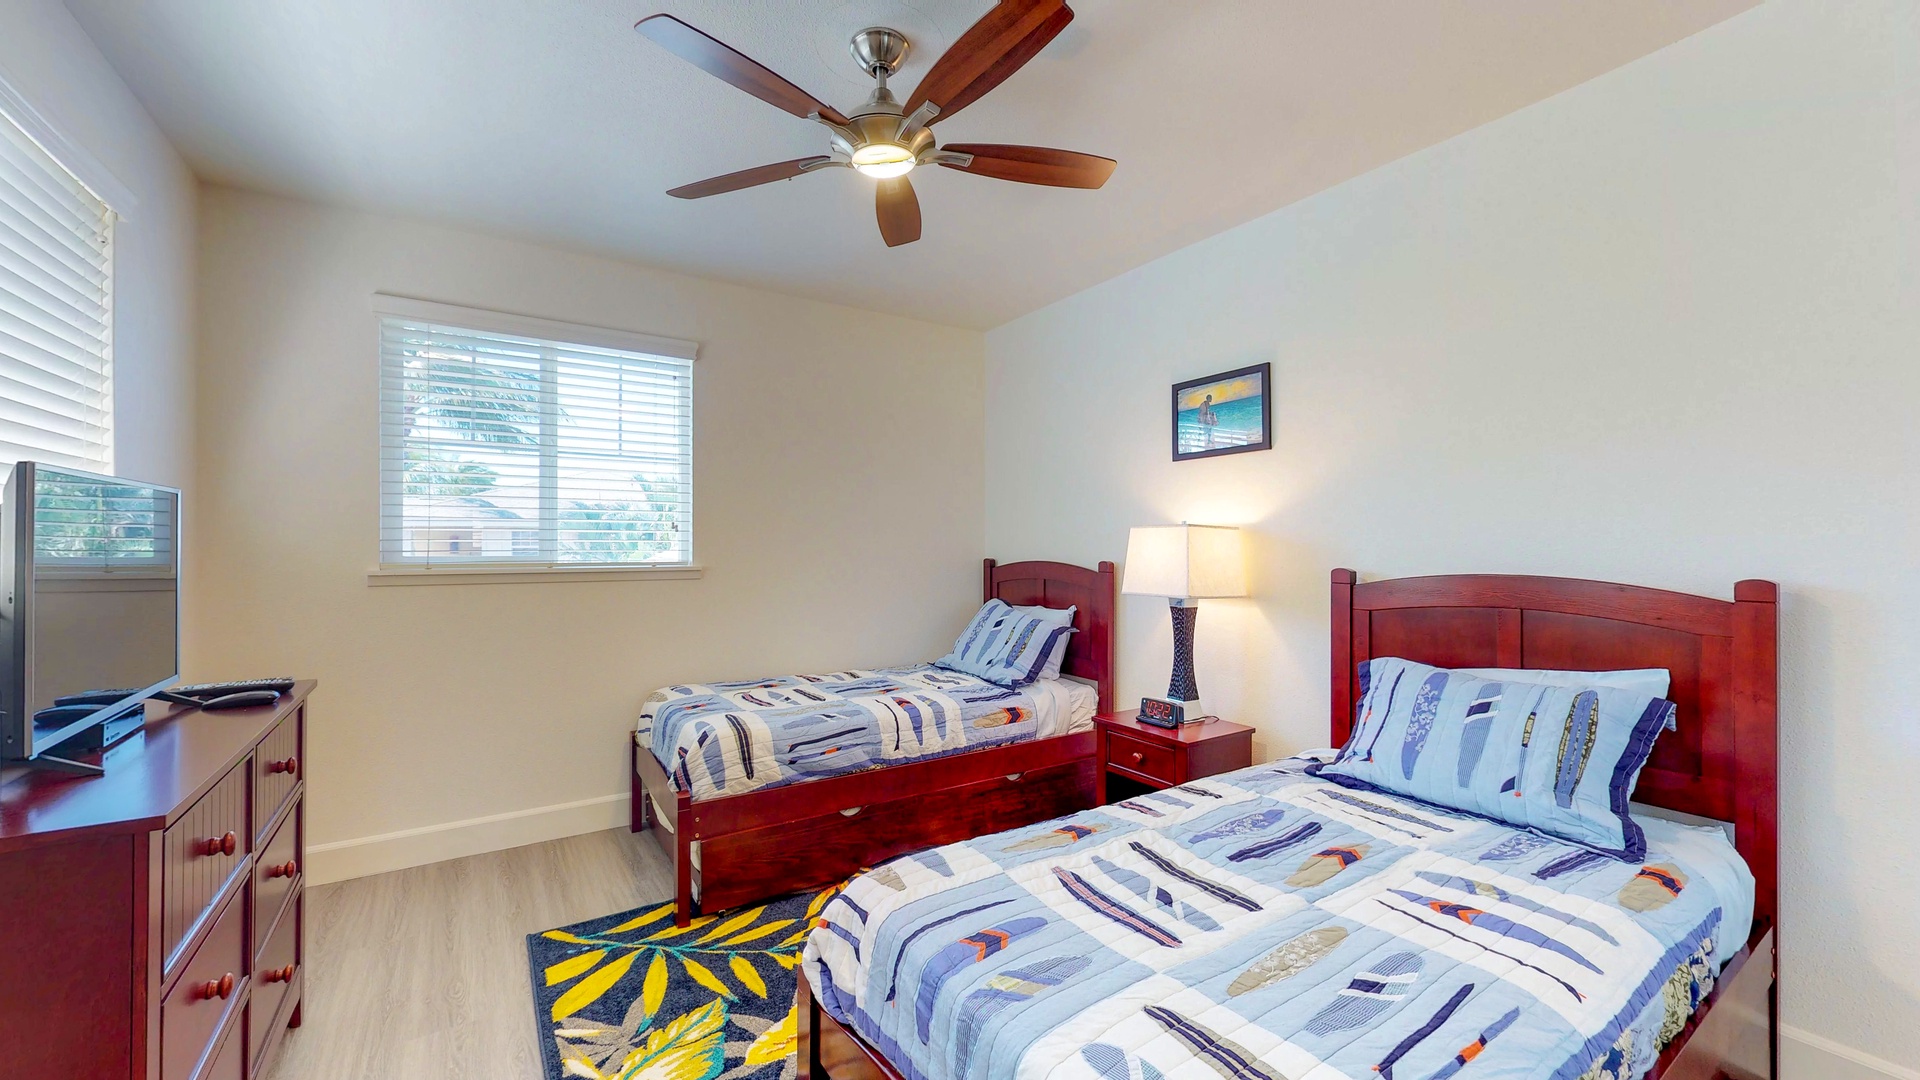 Kapolei Vacation Rentals, Ko Olina Kai 1051D - The third guest bedroom features twin beds and a trundle bed.